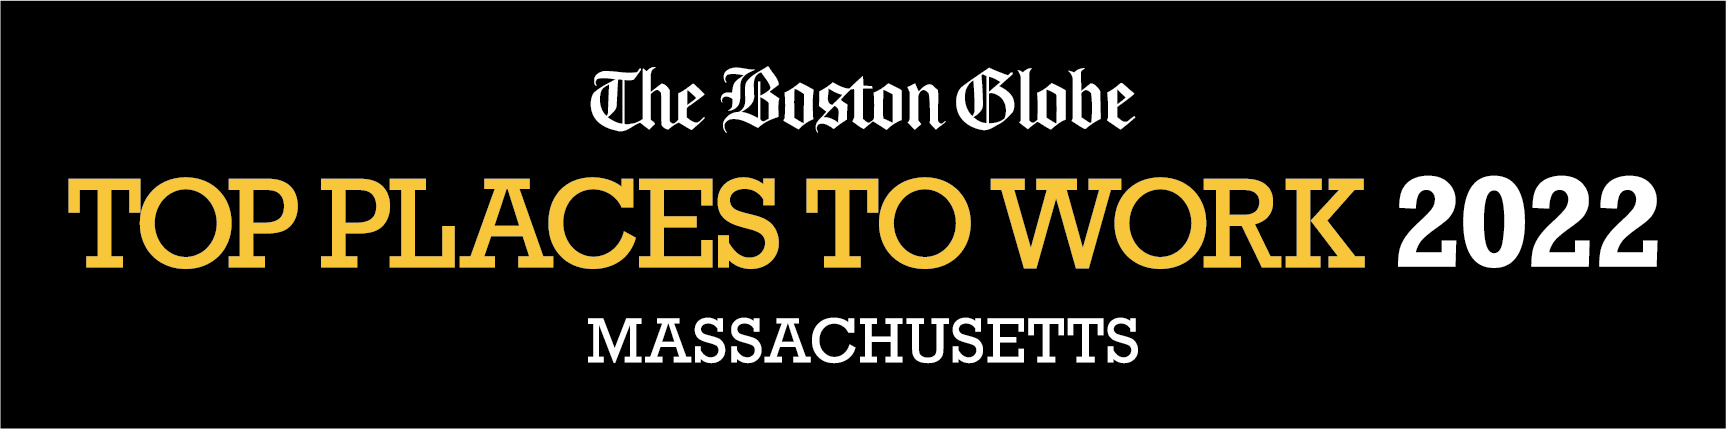 The Boston Globe Names Health Advances a Top Place to Work for 2022